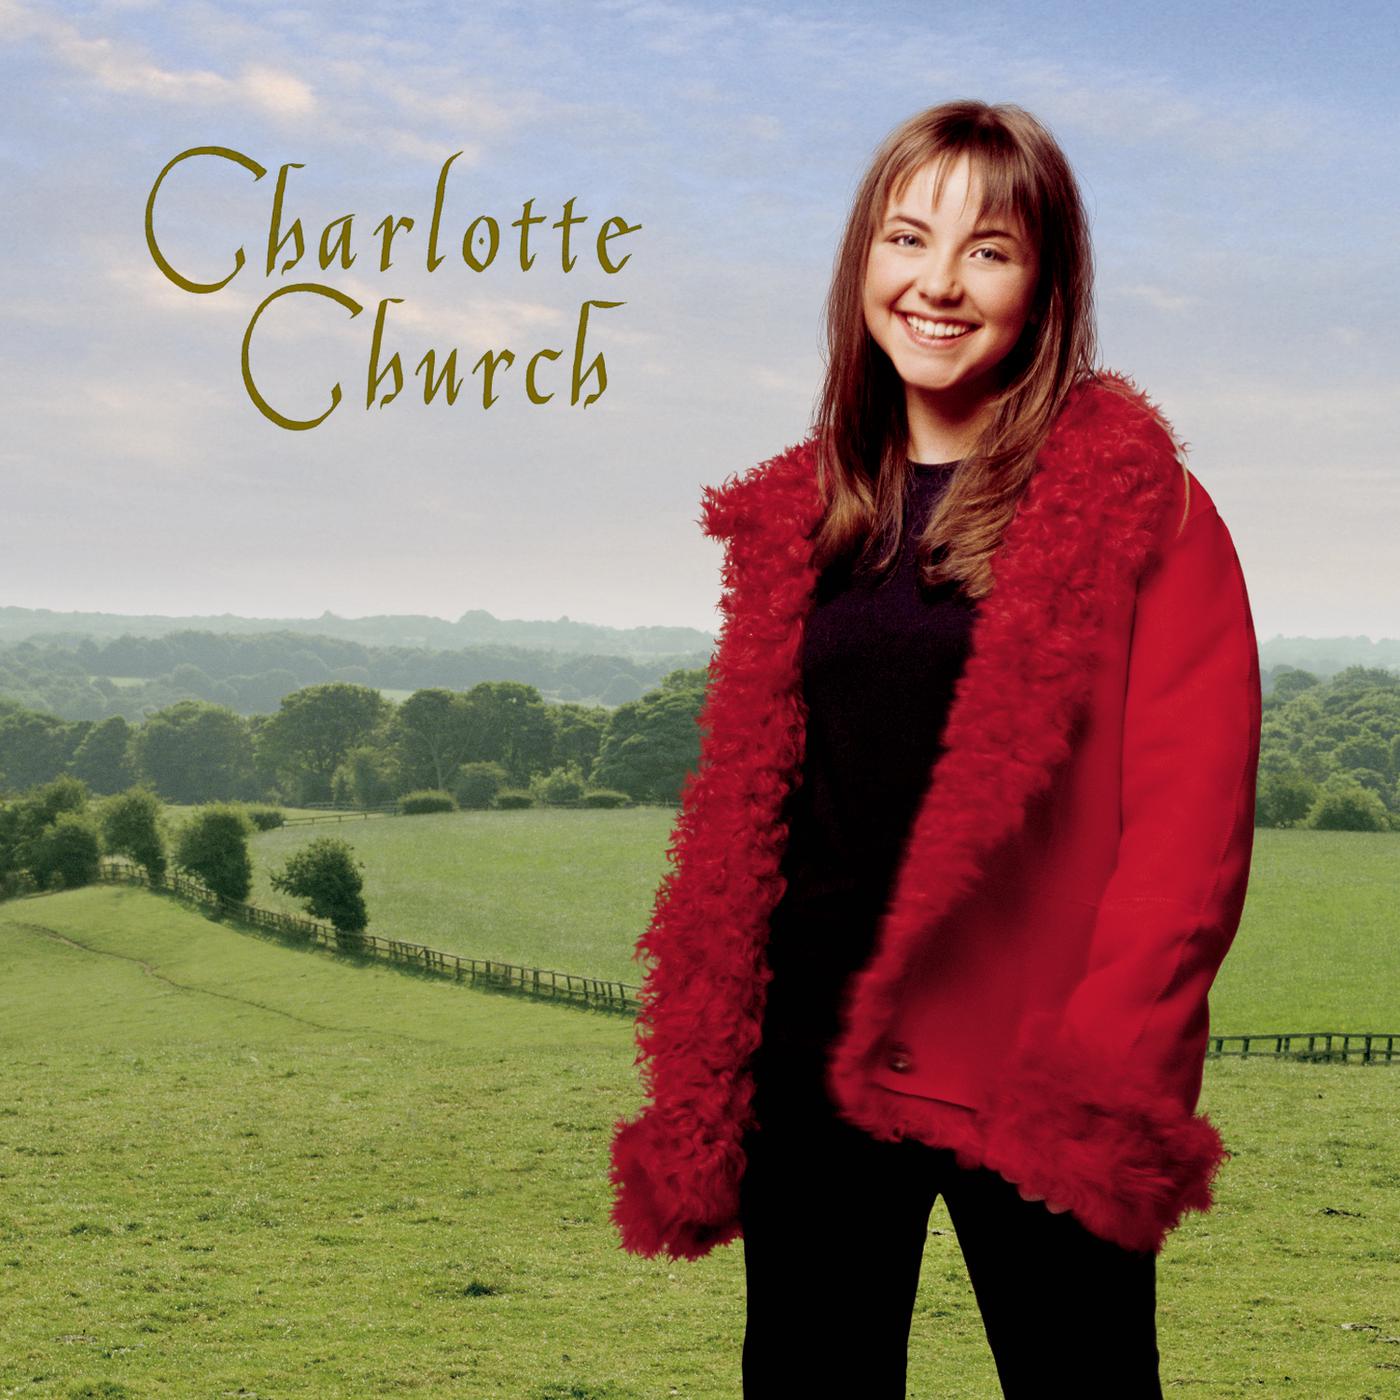 Charlotte Church - Bist du bei mir (If thou are near when life is closing)